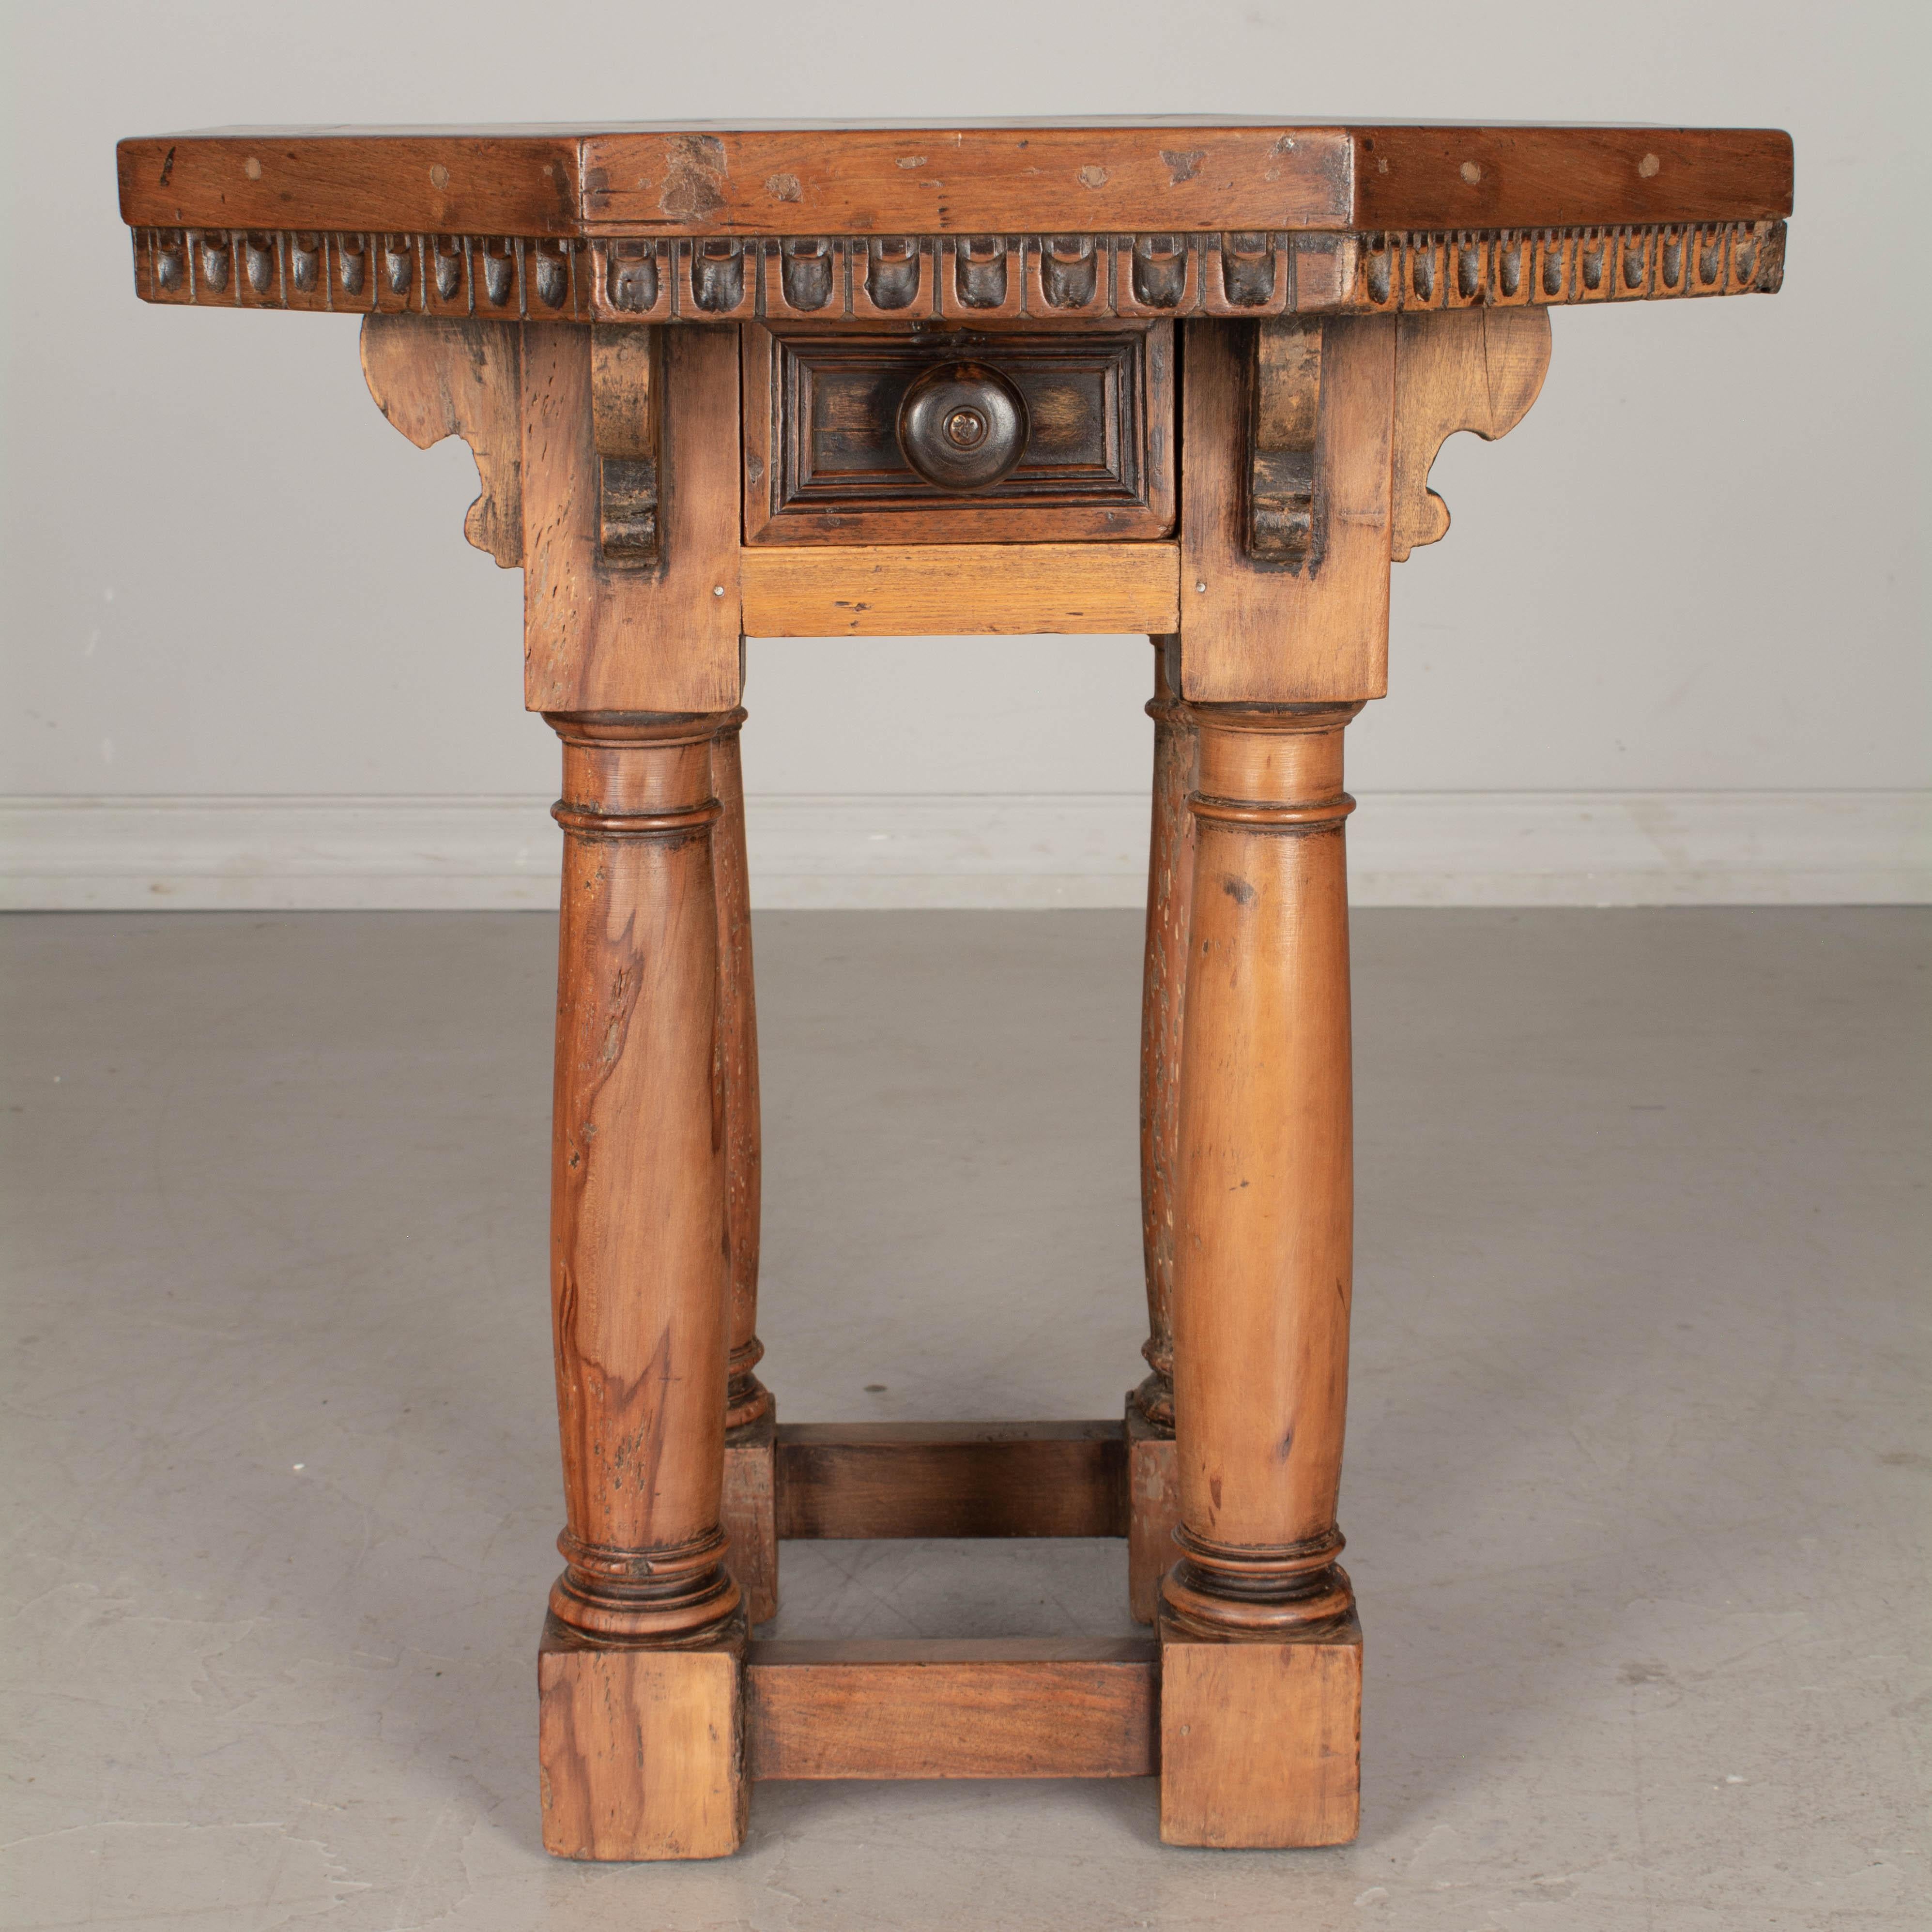 A rustic 19th century French side table with hexagon shaped top. Made of walnut and cherry woods with turned legs joined by stretchers. Small dovetailed drawer with turned knob.